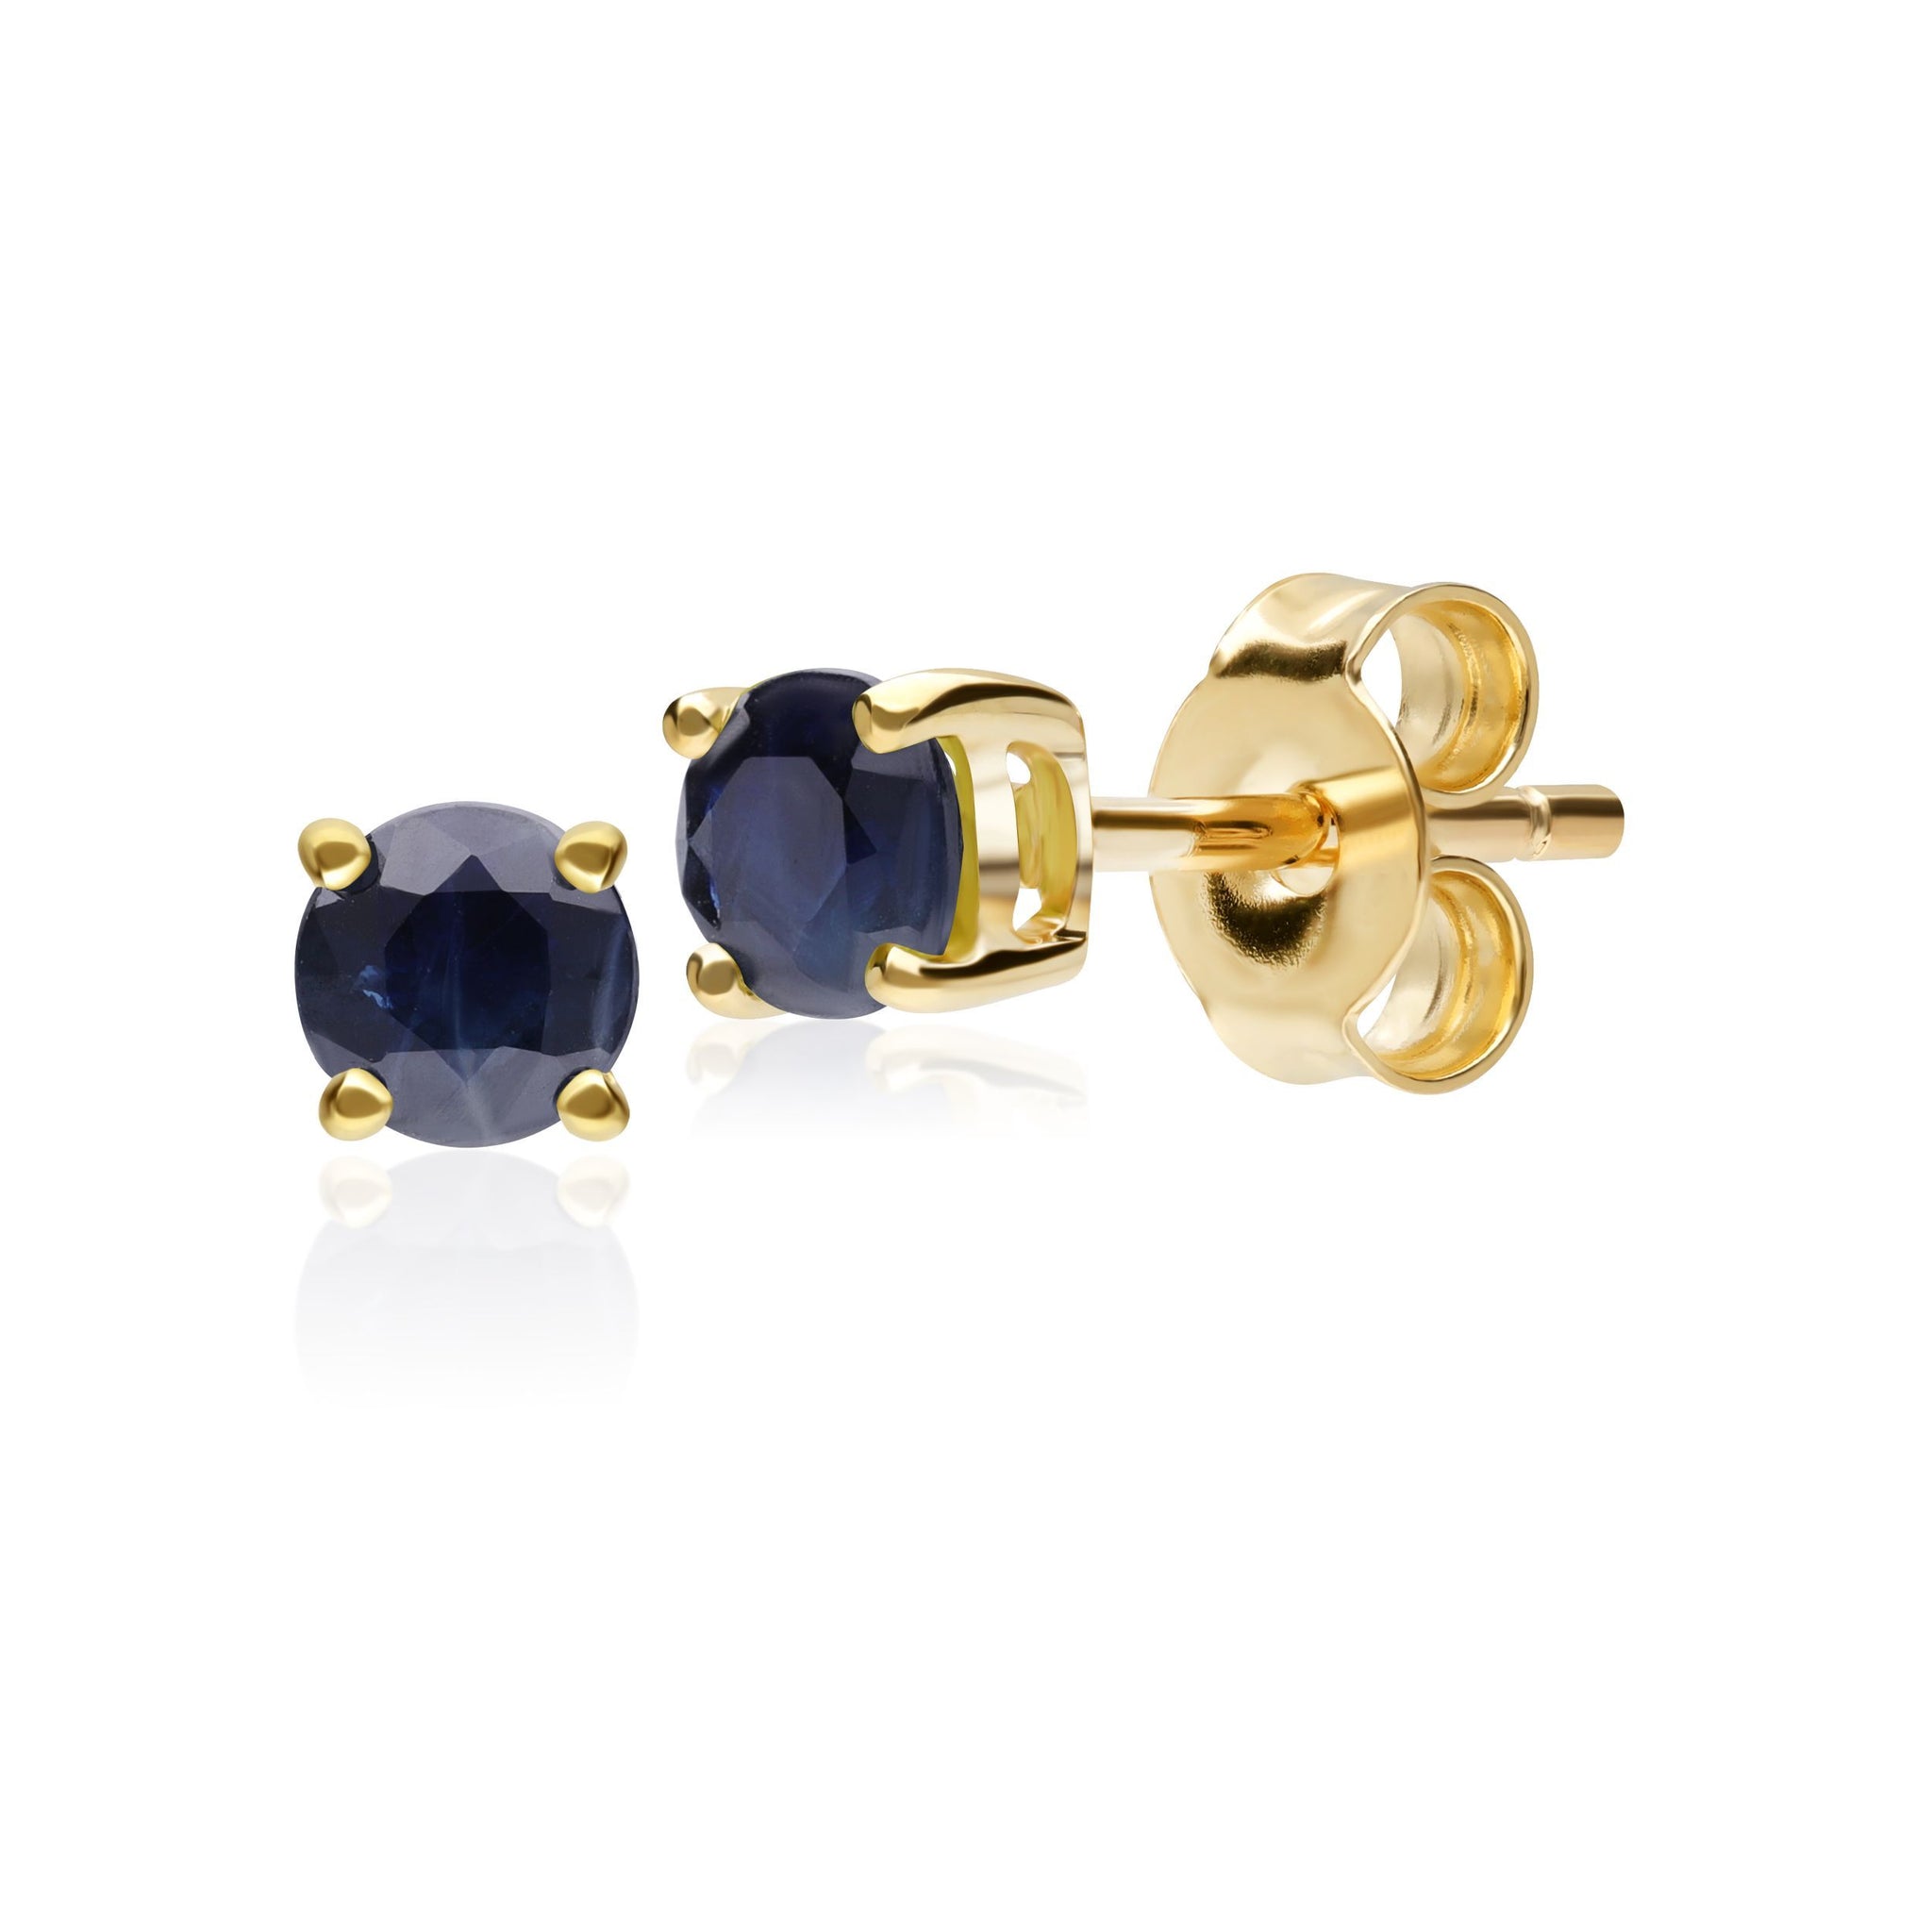 Classic Round Sapphire Stud Earrings in 9ct Yellow Gold 3.5mm